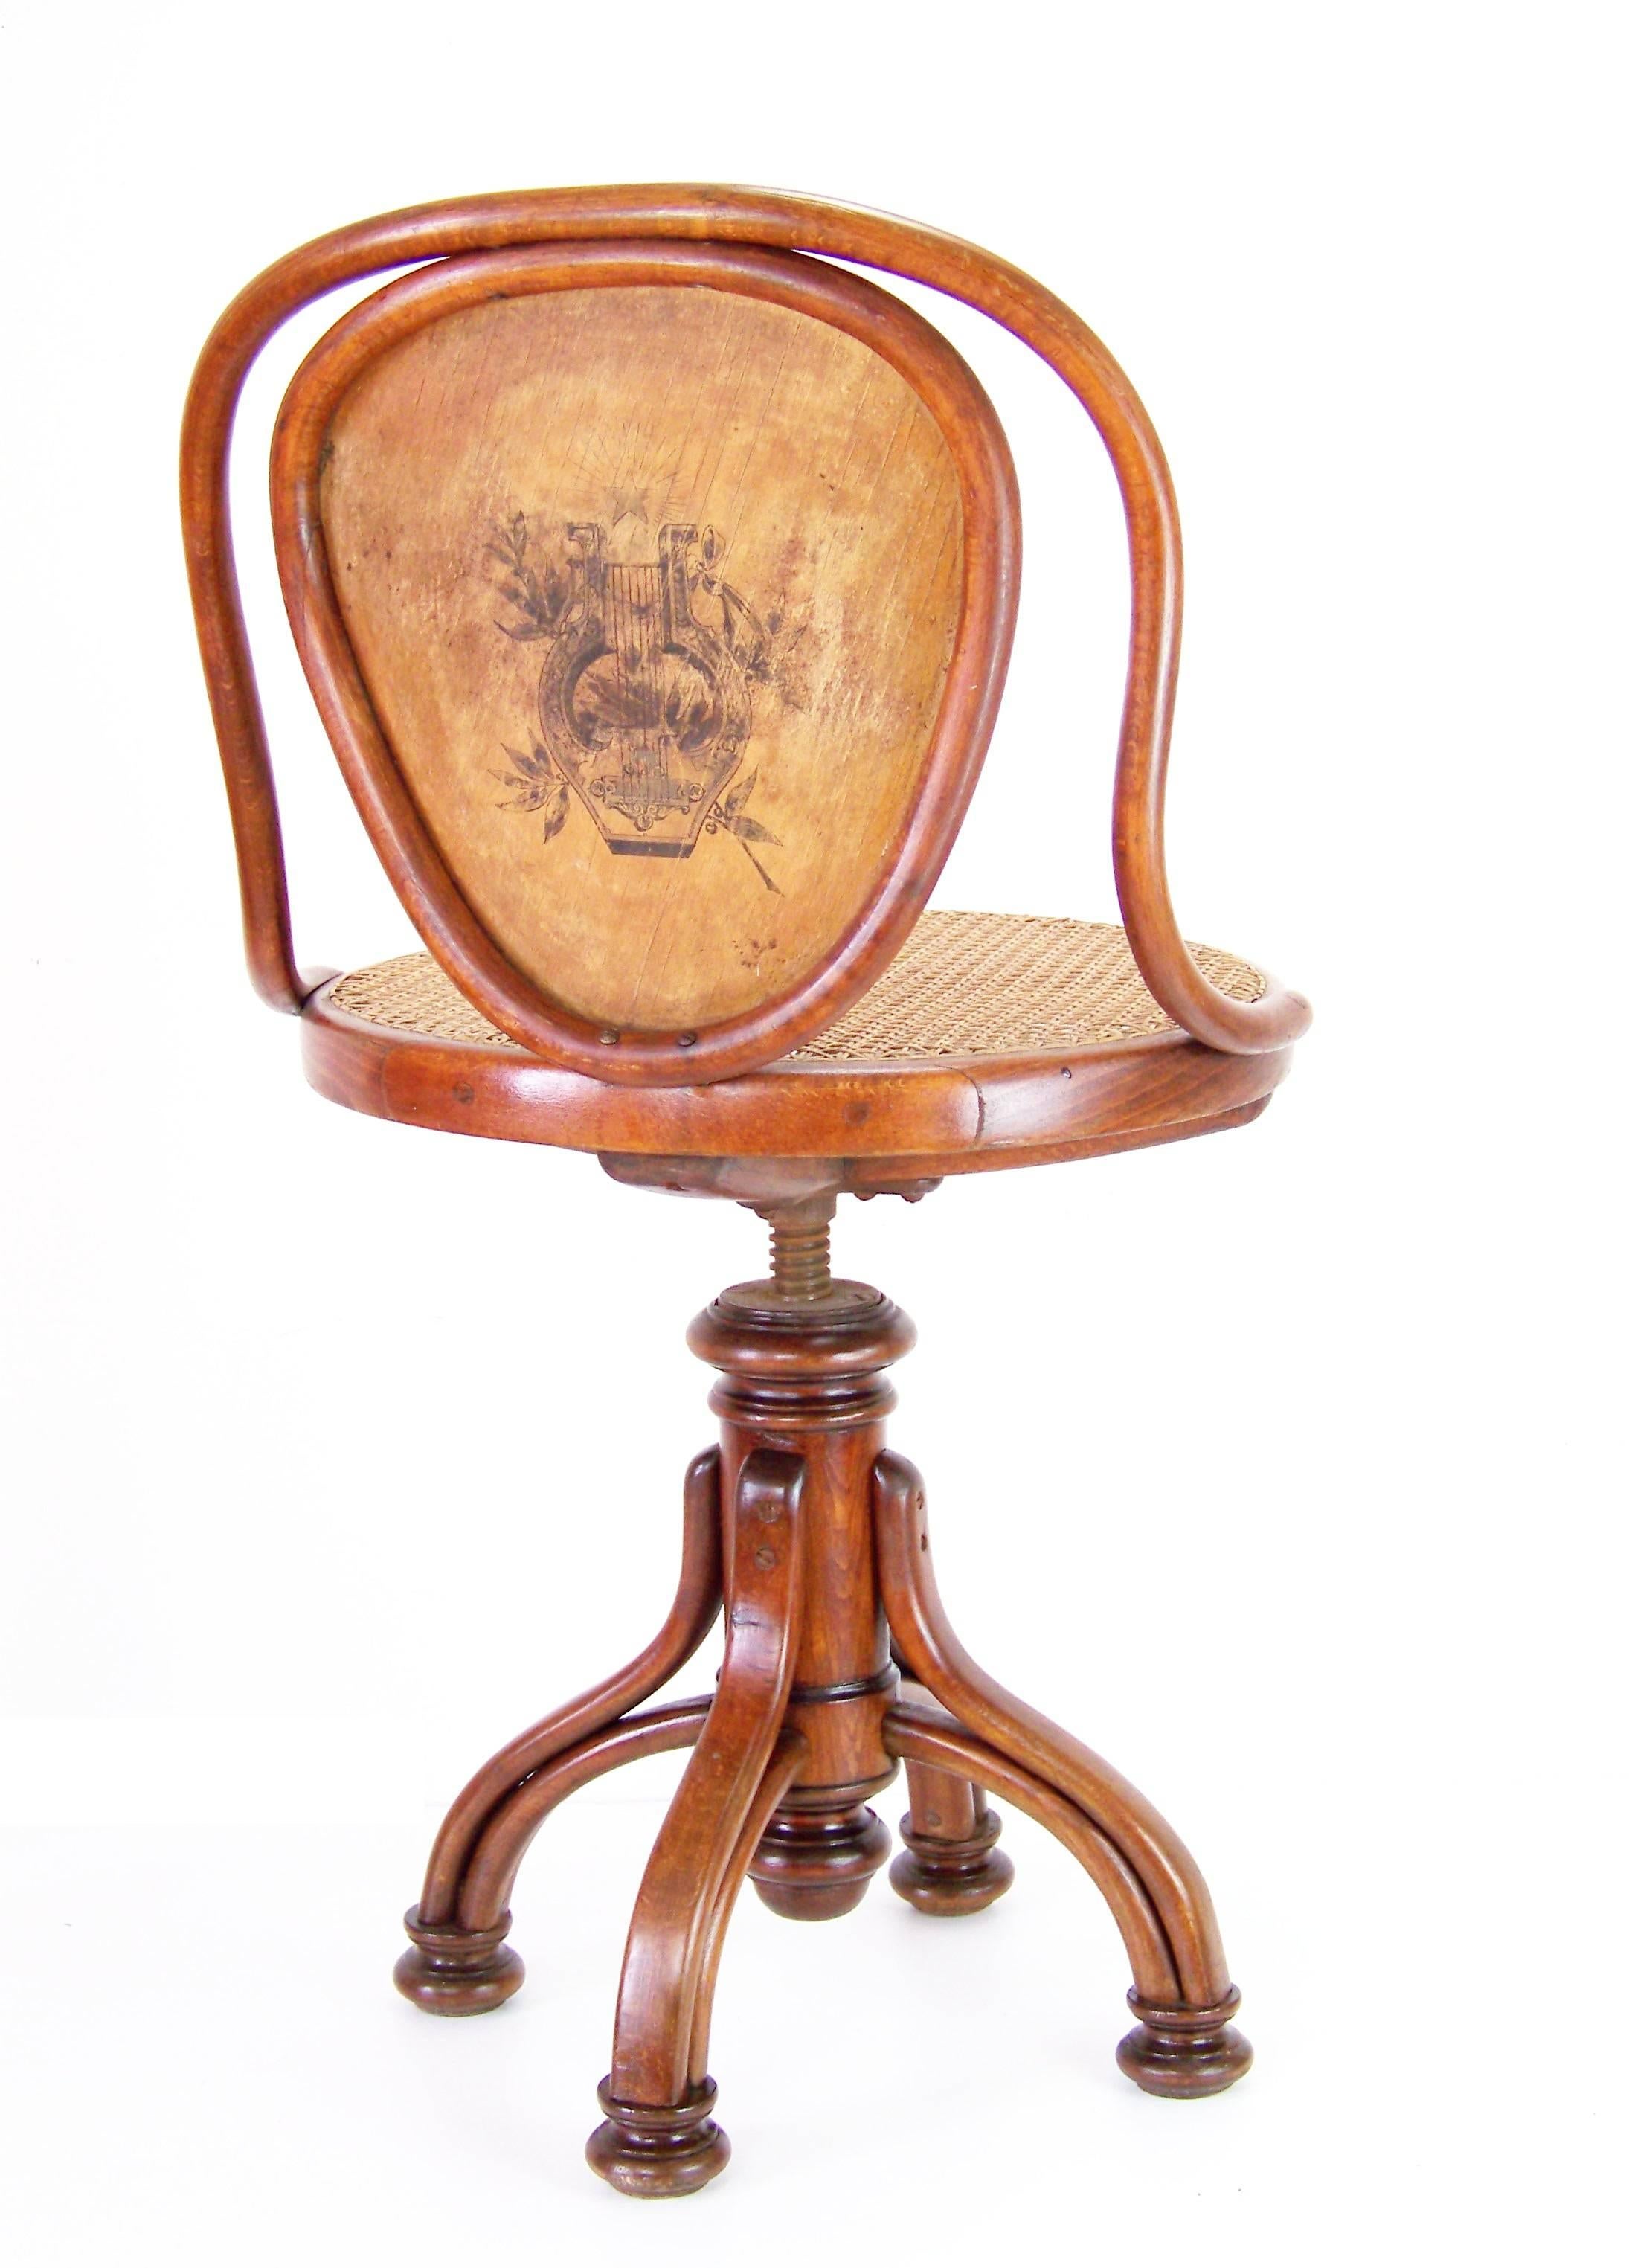 Manufactured in Austria by the Gebrüder Thonet Company. In the production program was included around the year 1899. Marked with paper label, which is used circa 1887-1910. At the back displayed Richard Wagner's portrait. Original state.